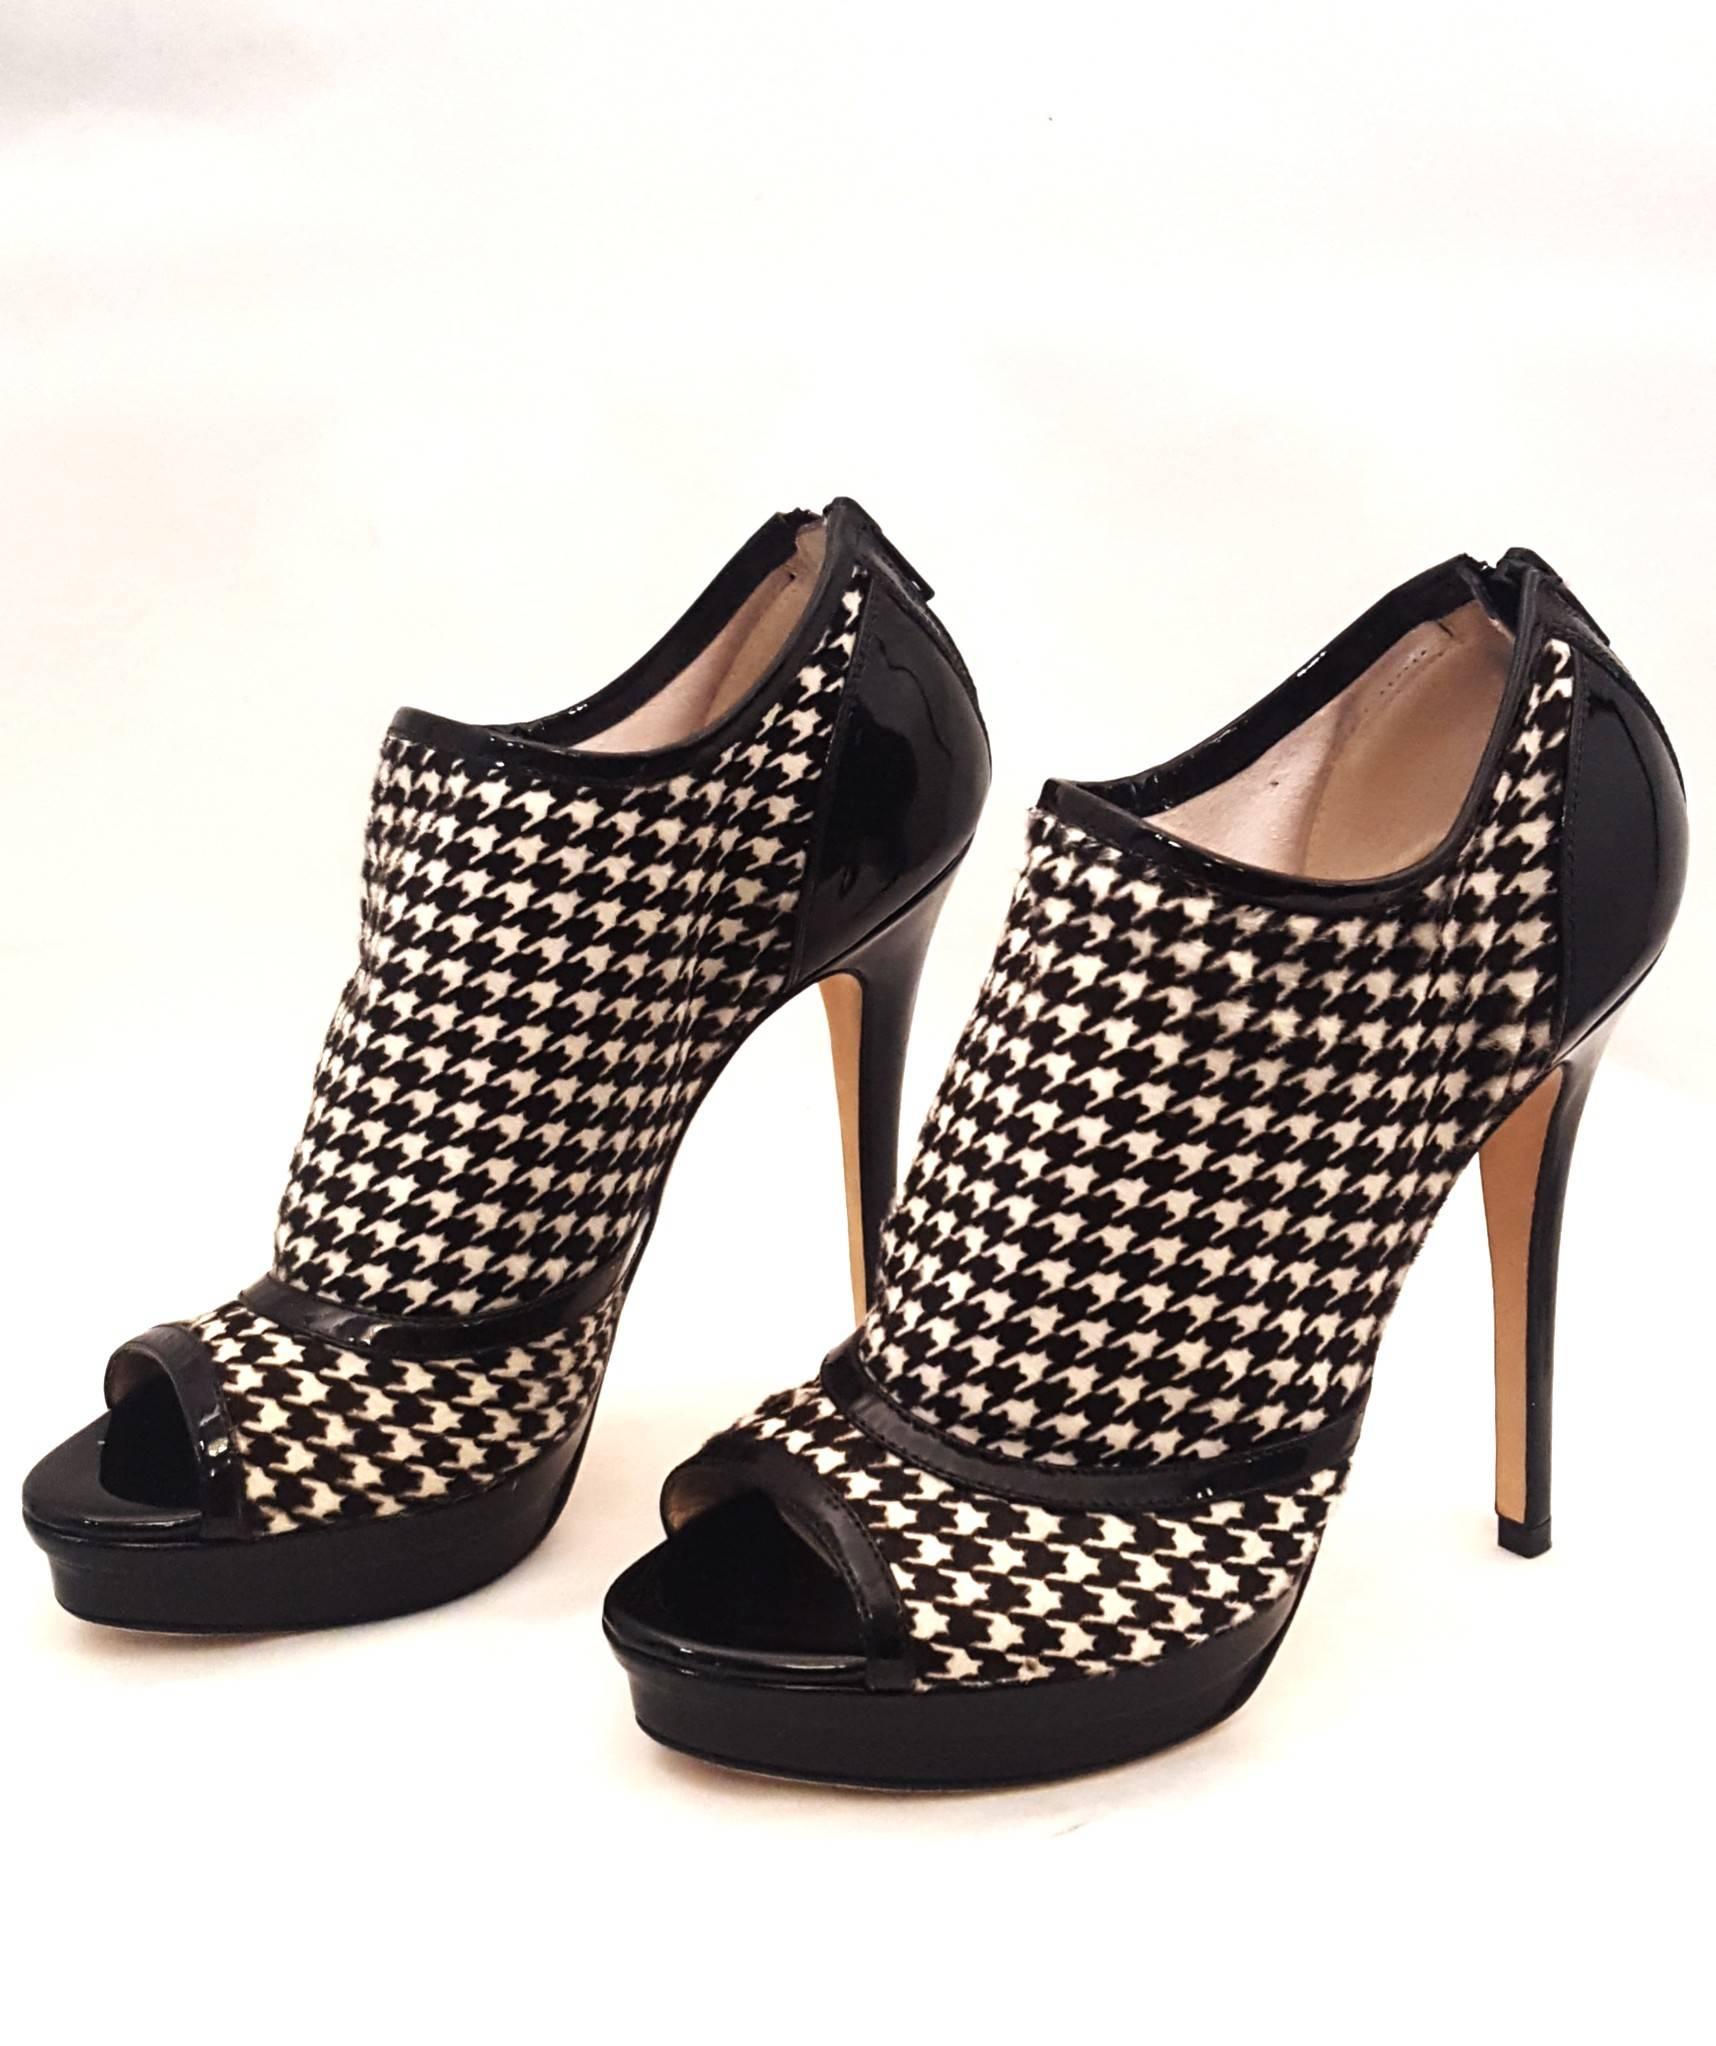 Jerome C. Rousseau Elli black patent with black and white Houndstooth print fabric is a favorite of ours!  These boots are fully lined in ivory leather including the insole and have a zipper at back of heel for closure.  The houndstooth print boots